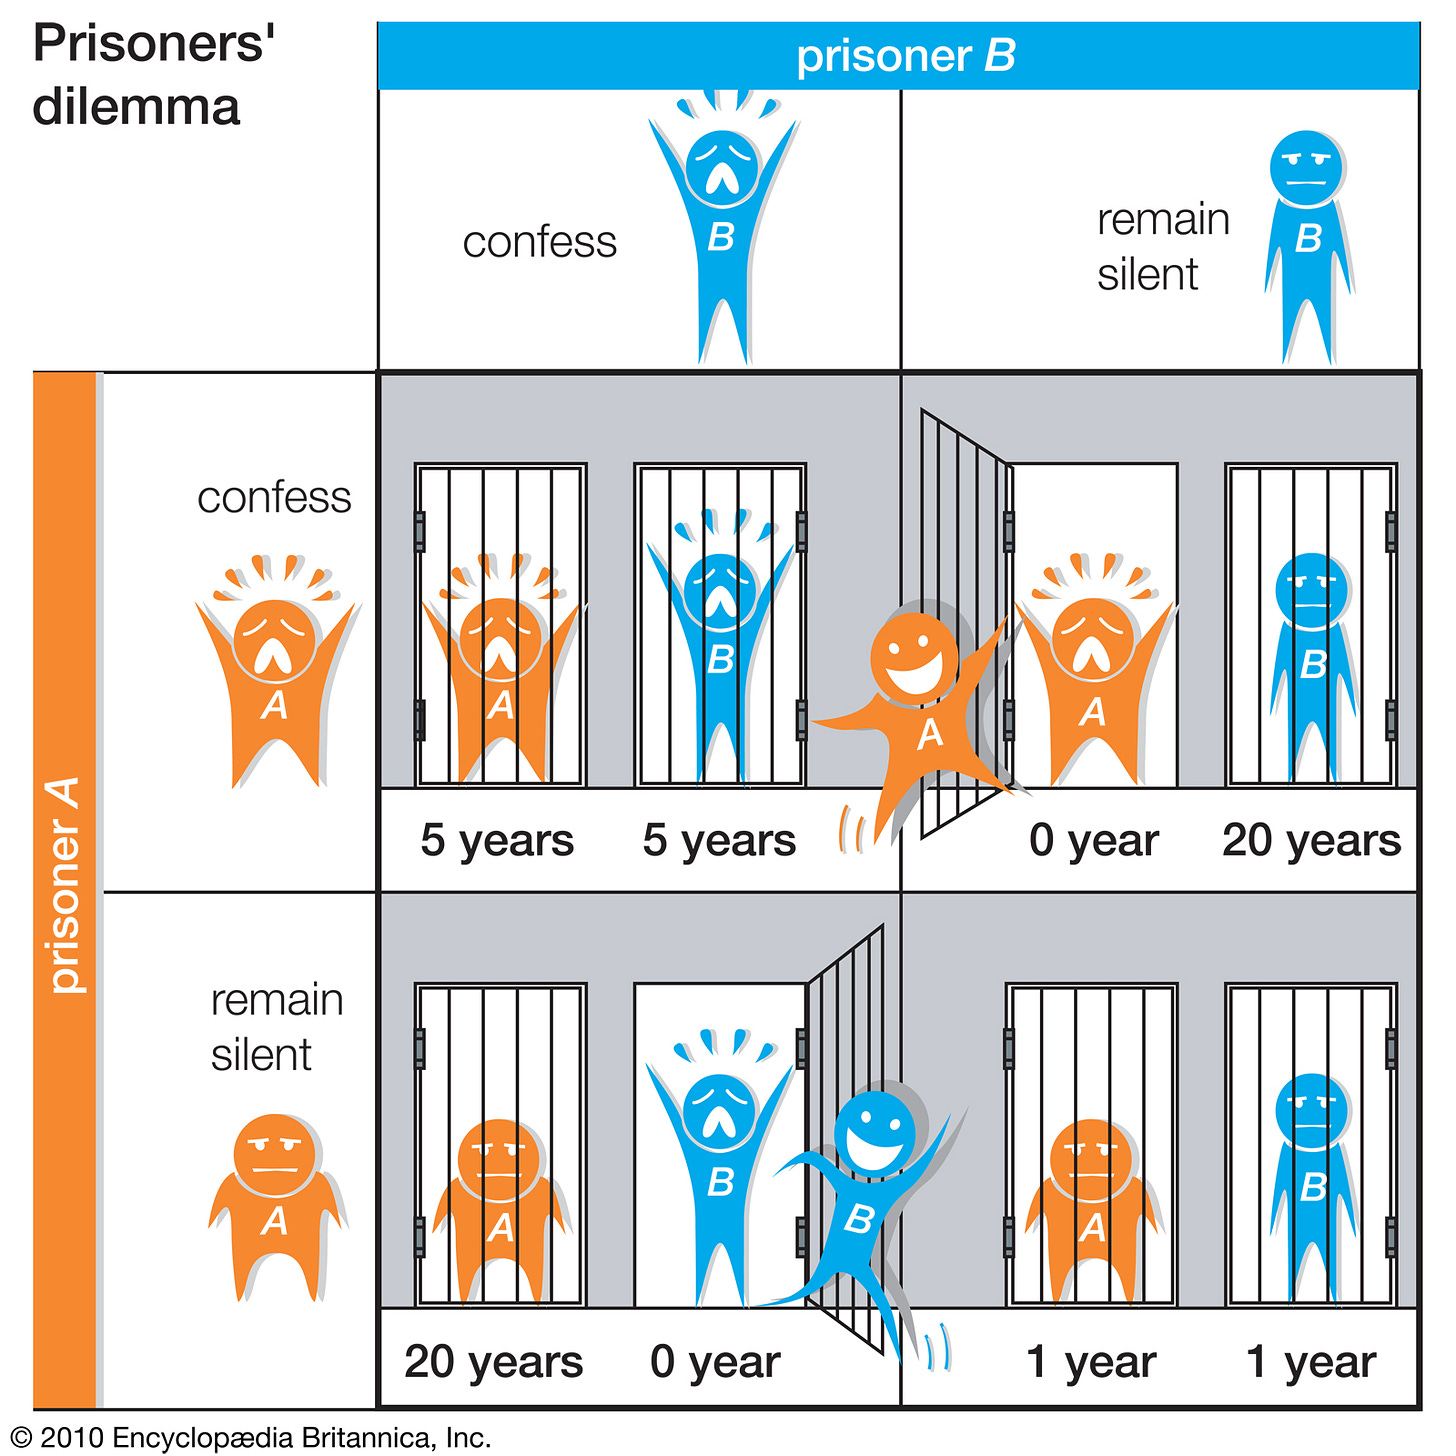 Game theory - The prisoner's dilemma | Britannica